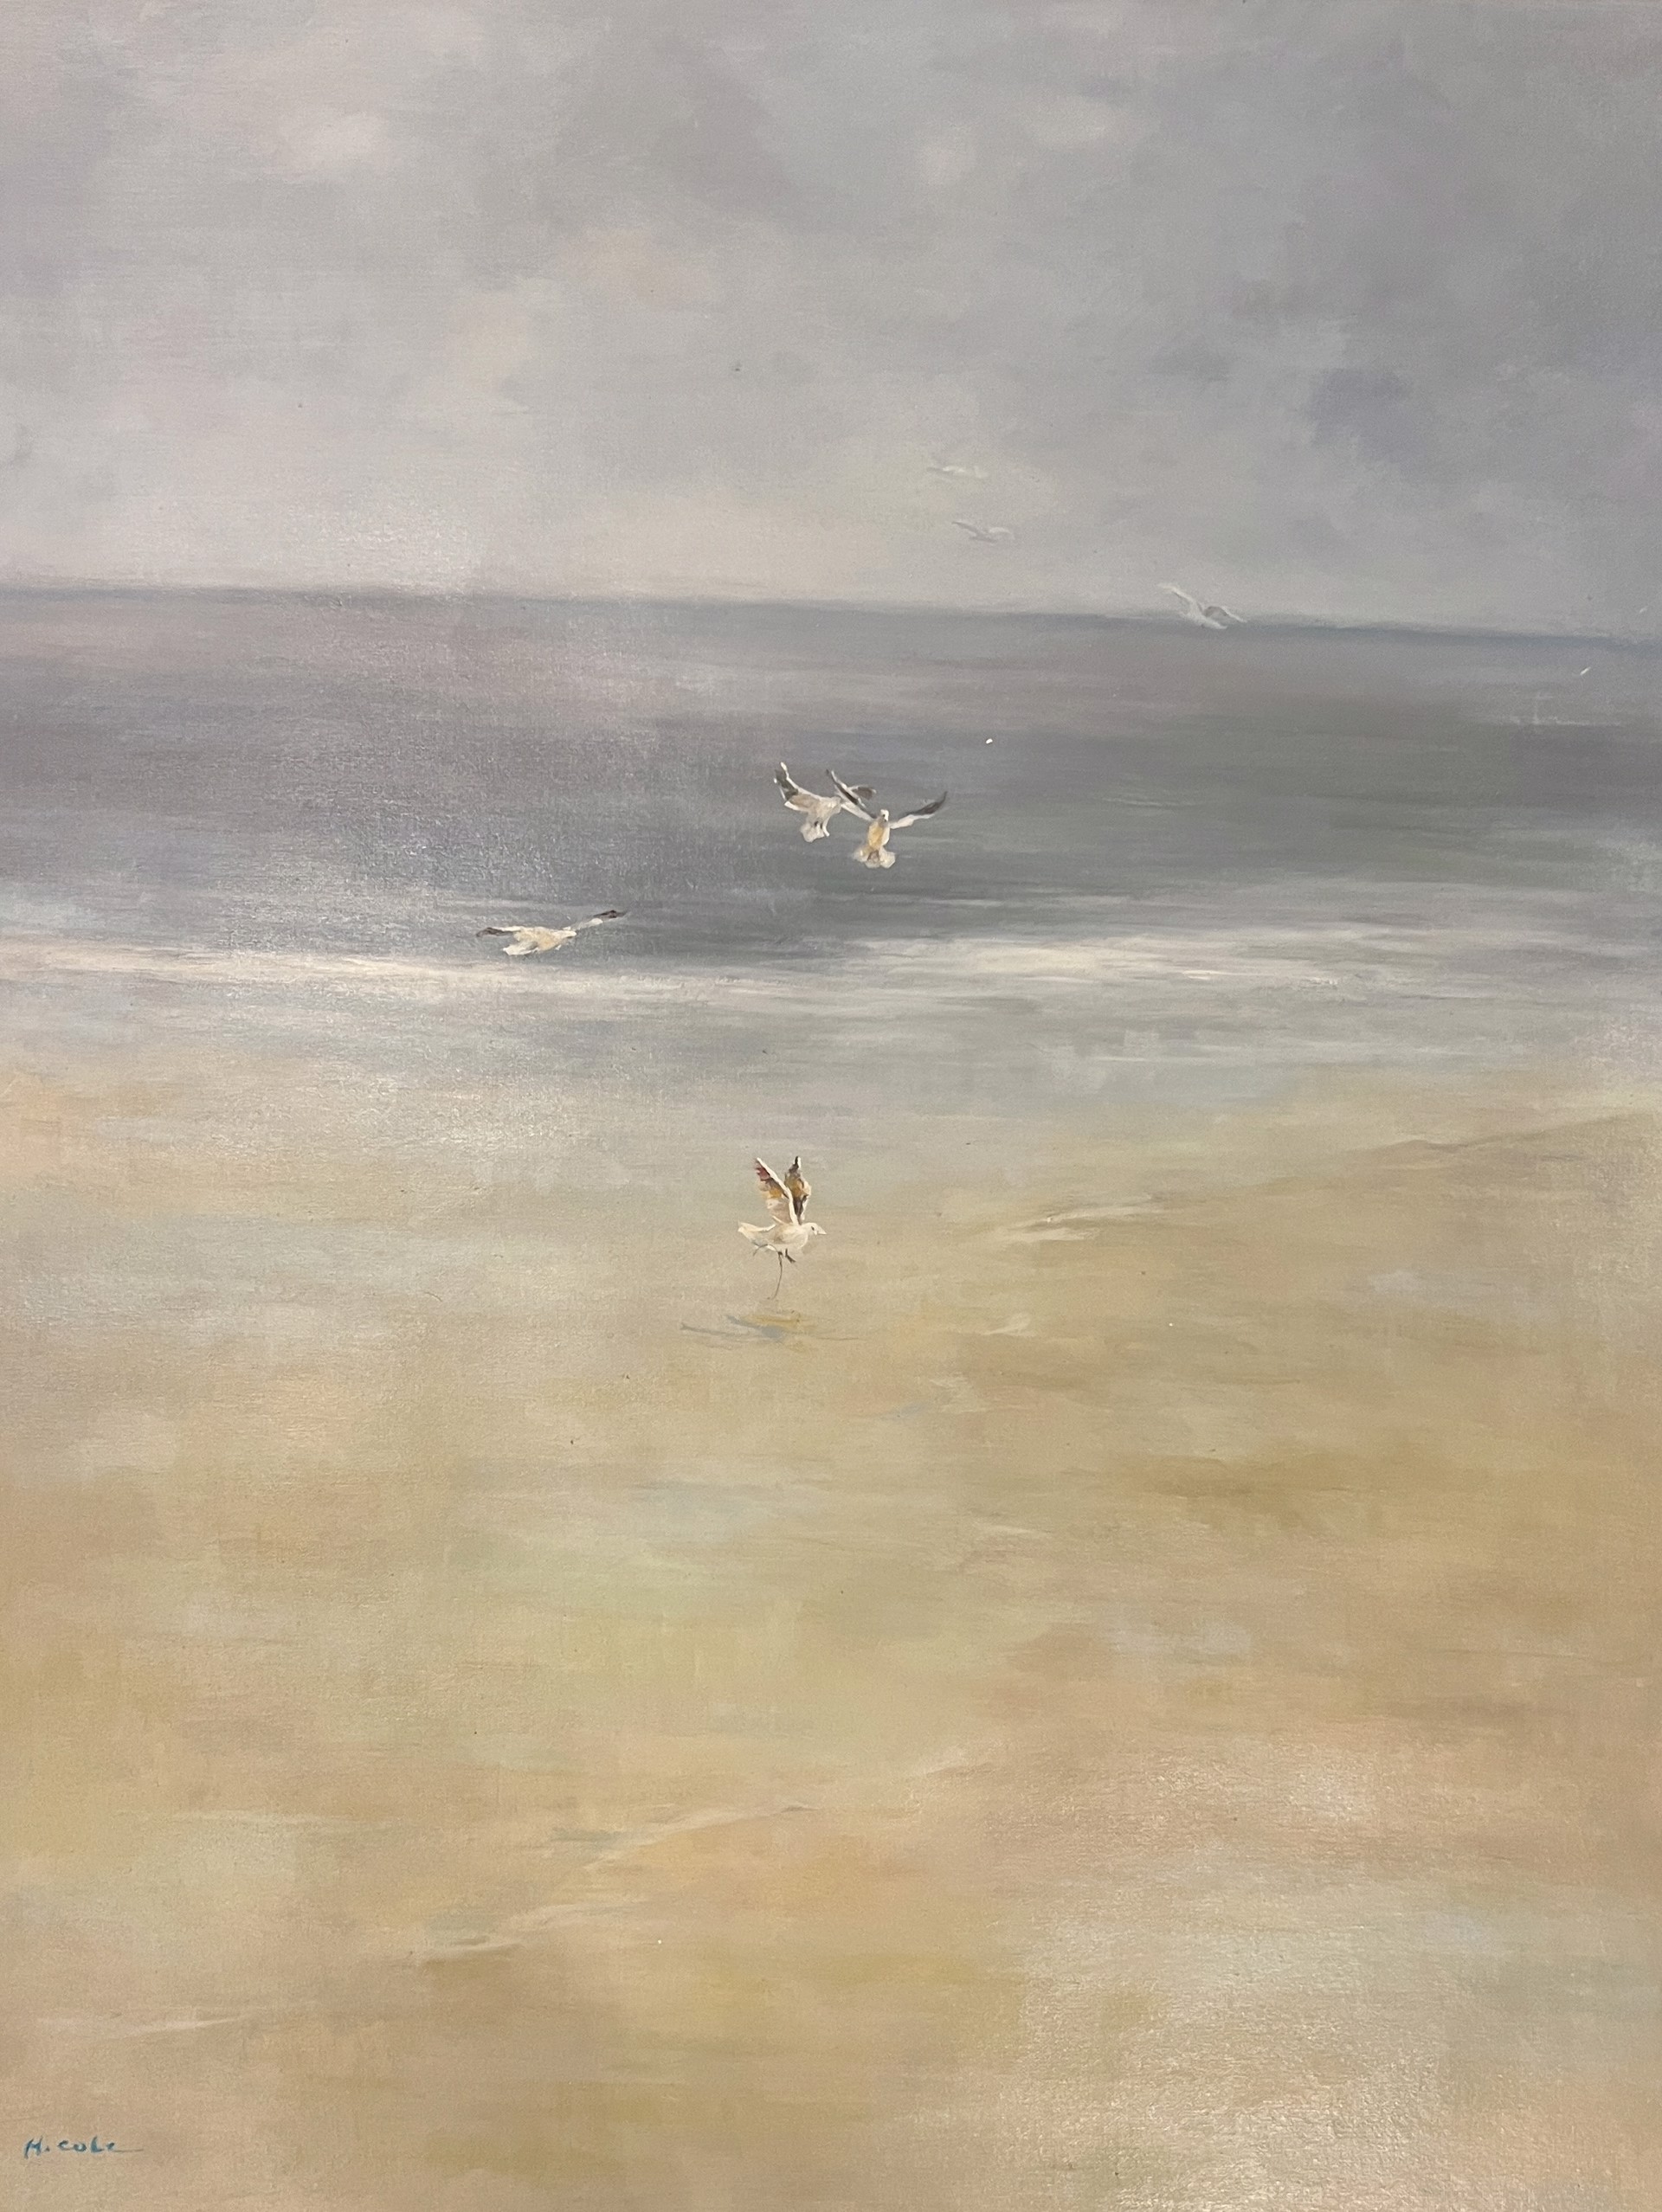 GULLS AT THE BEACH by H COLE